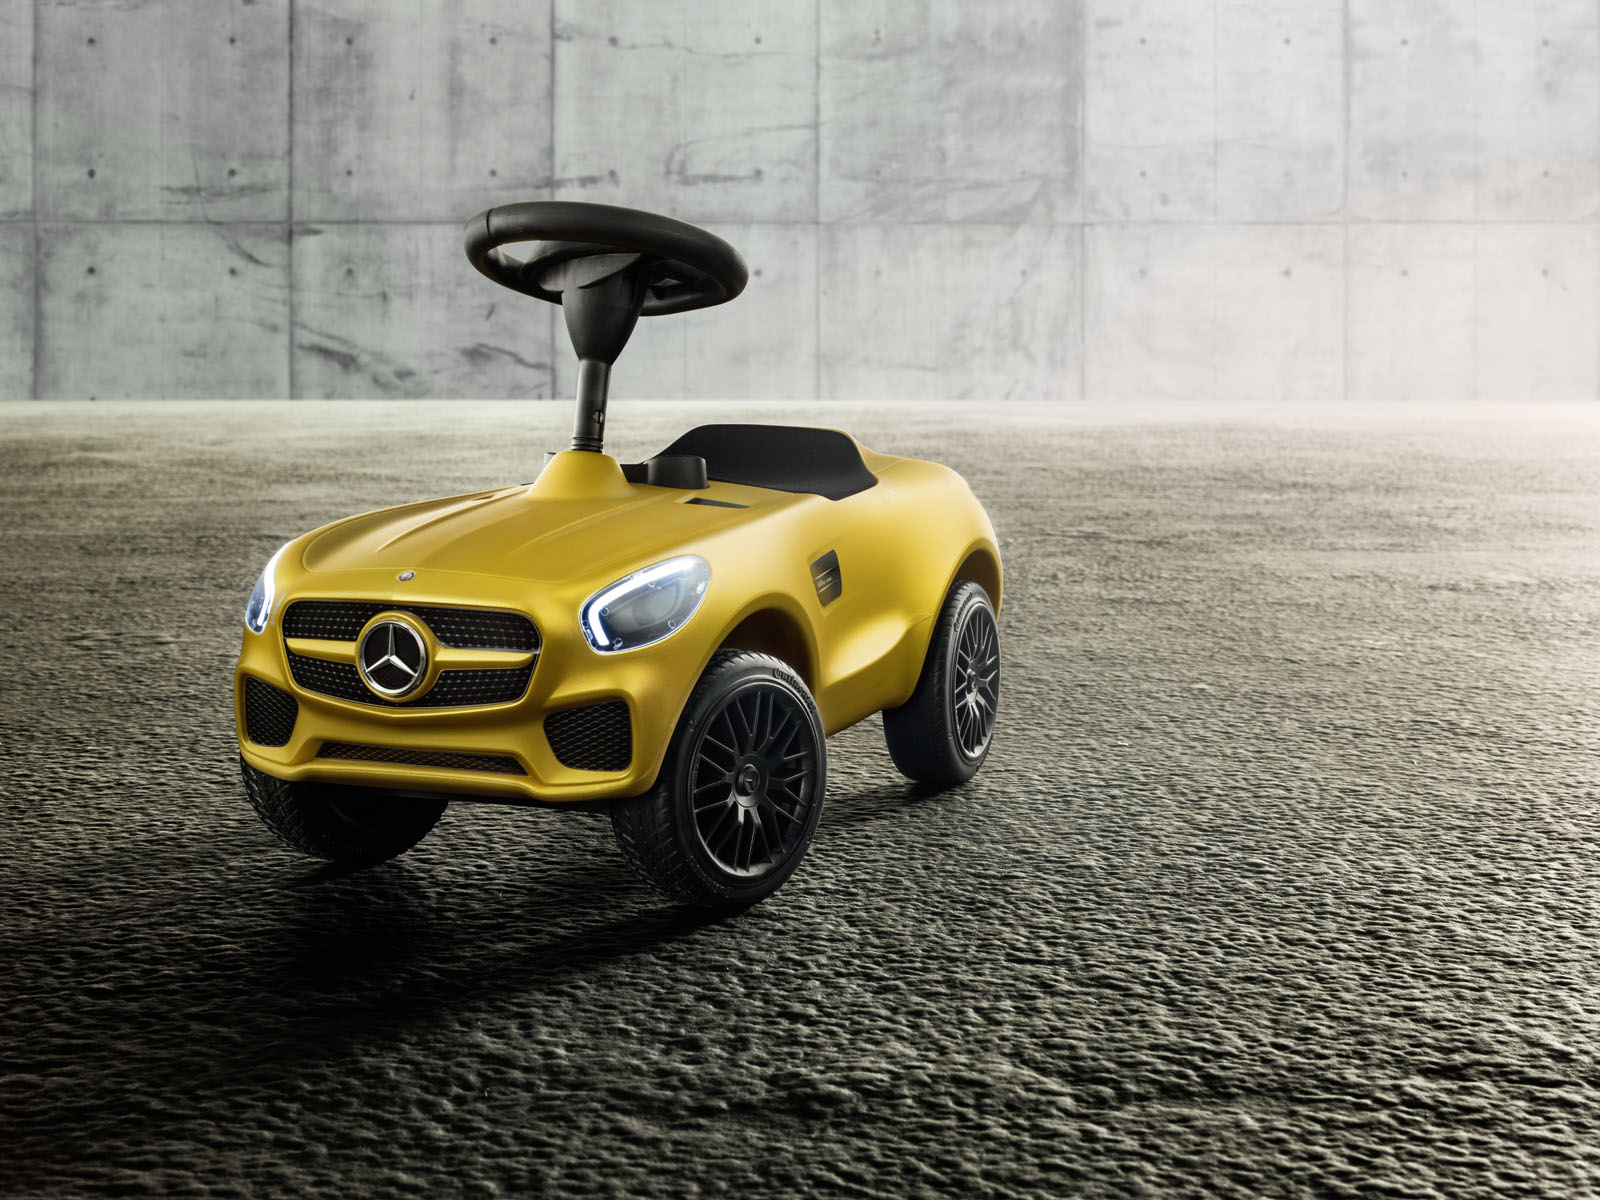 Mercedes-AMG GT Shrinks Down To Kid Size As New Bobby Car